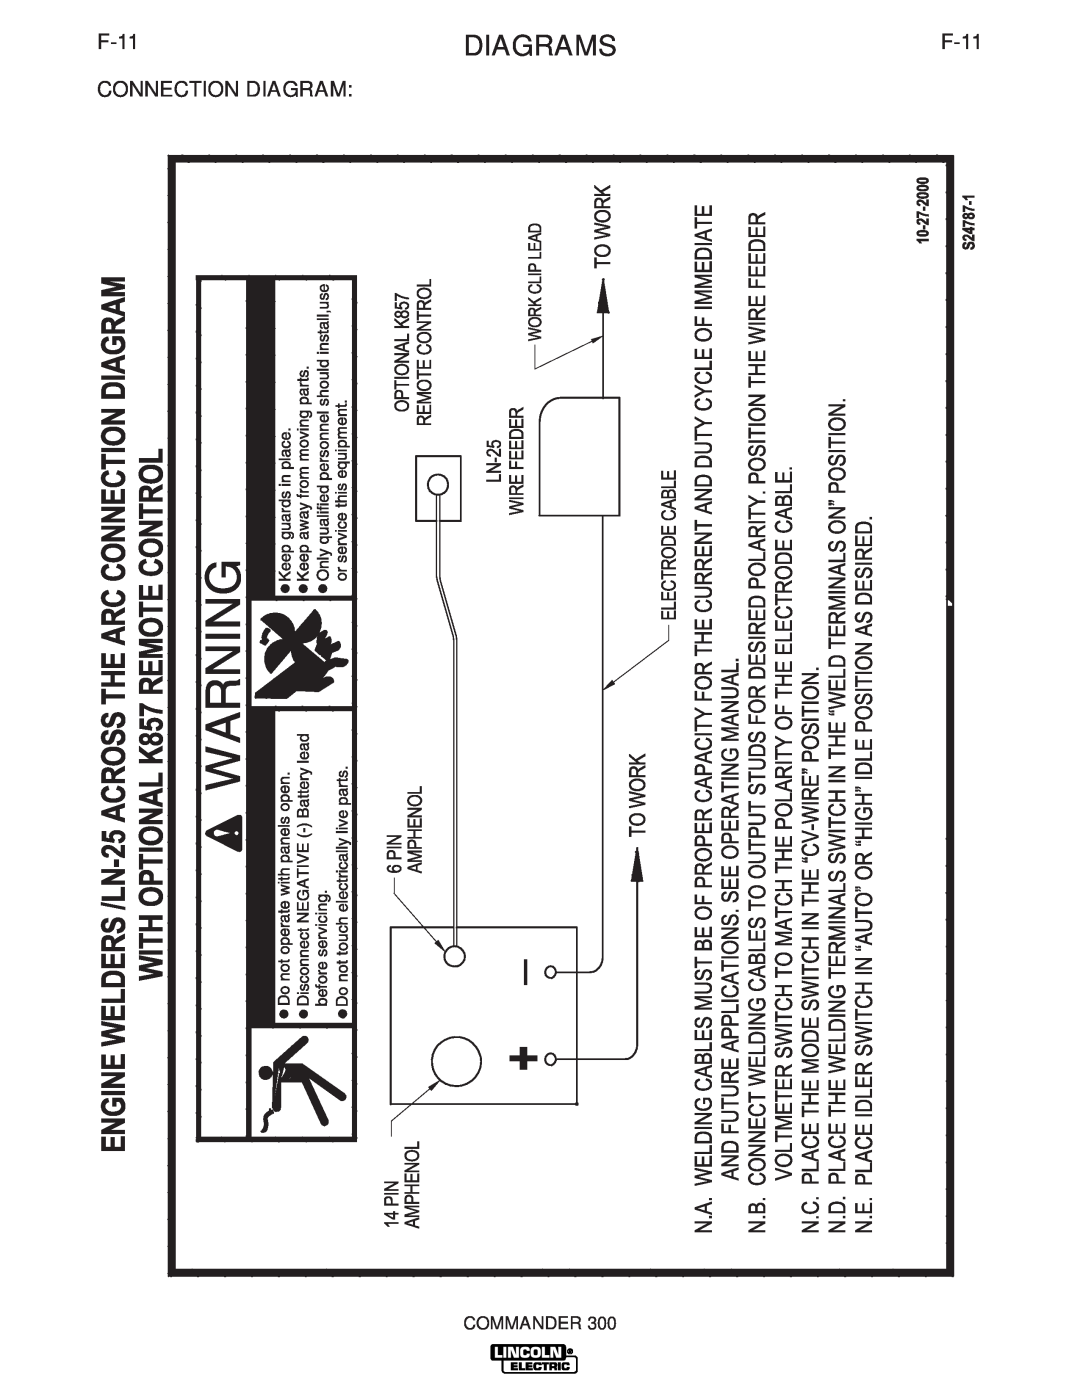 Lincoln Electric IM700-D manual DIAGRAMSF-11, F-11 CONNECTION DIAGRAM, Commander 